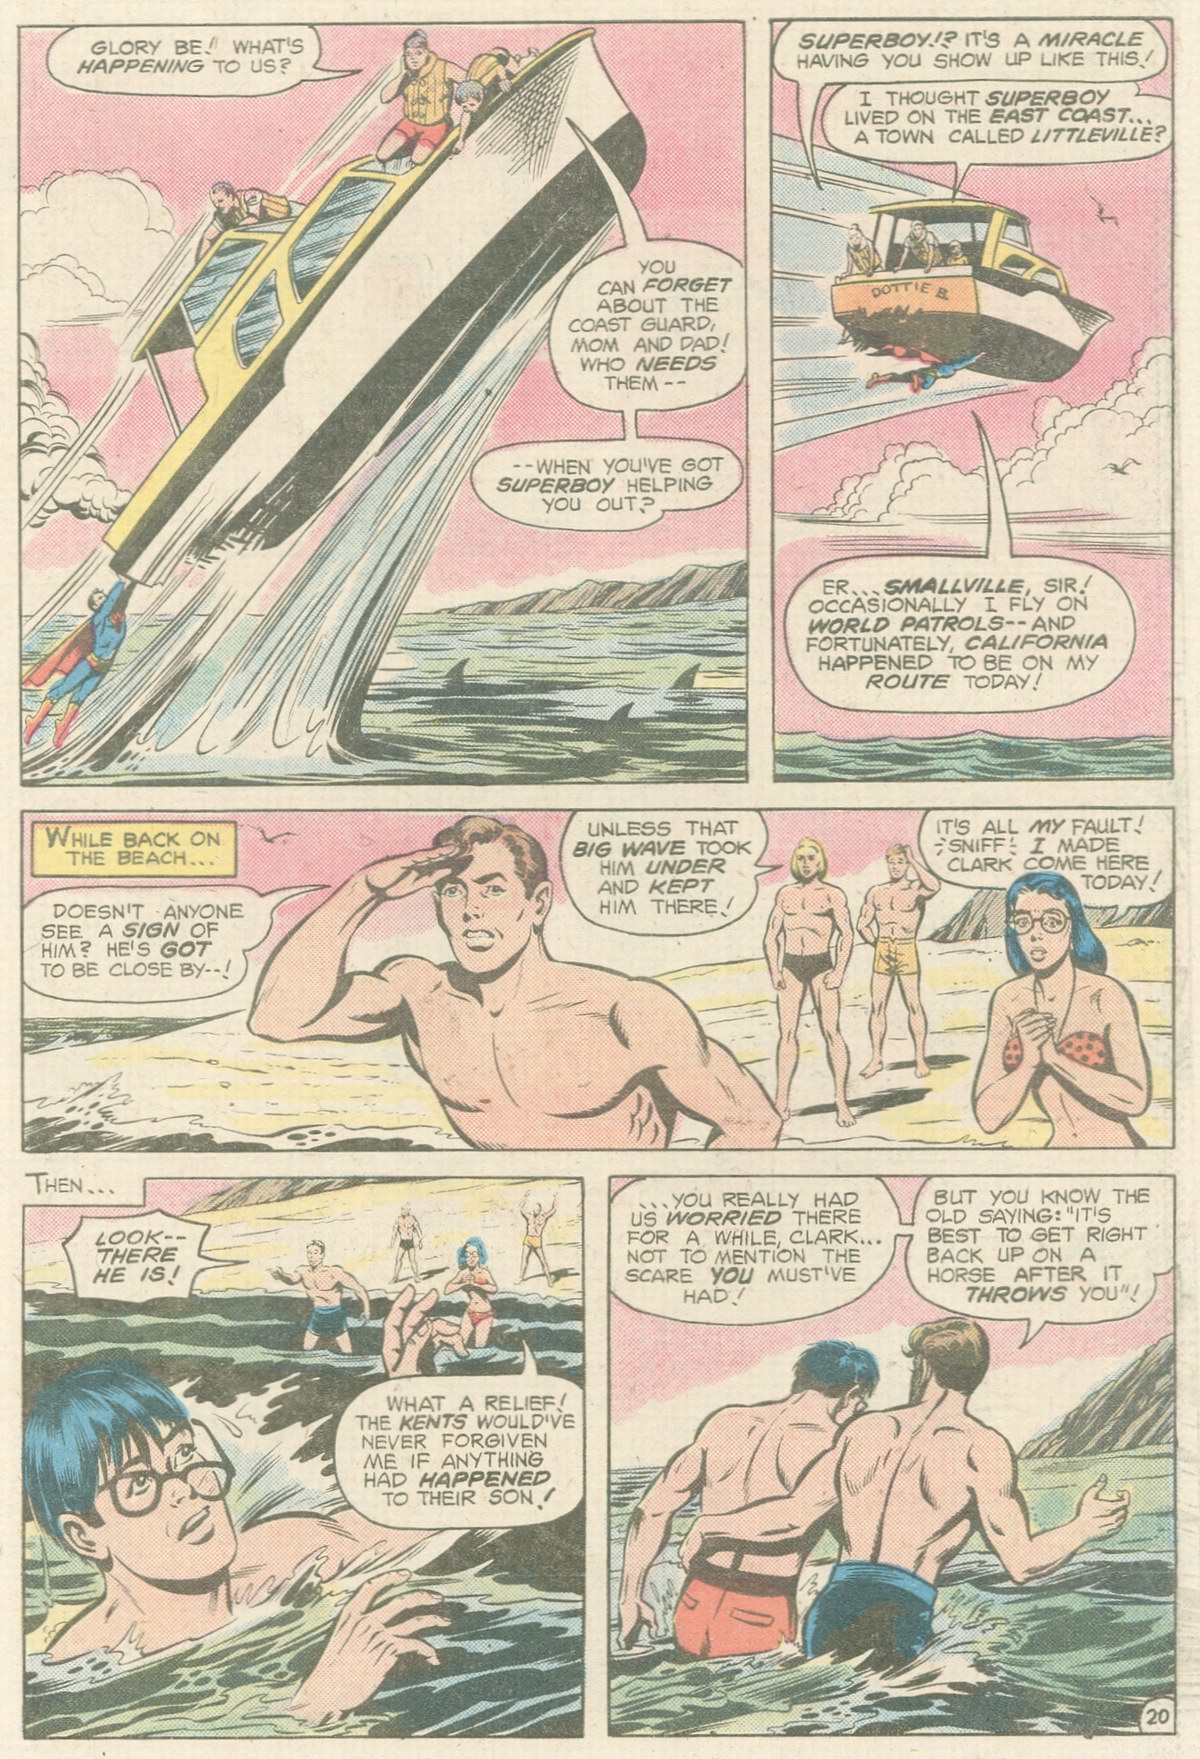 The New Adventures of Superboy 13 Page 20